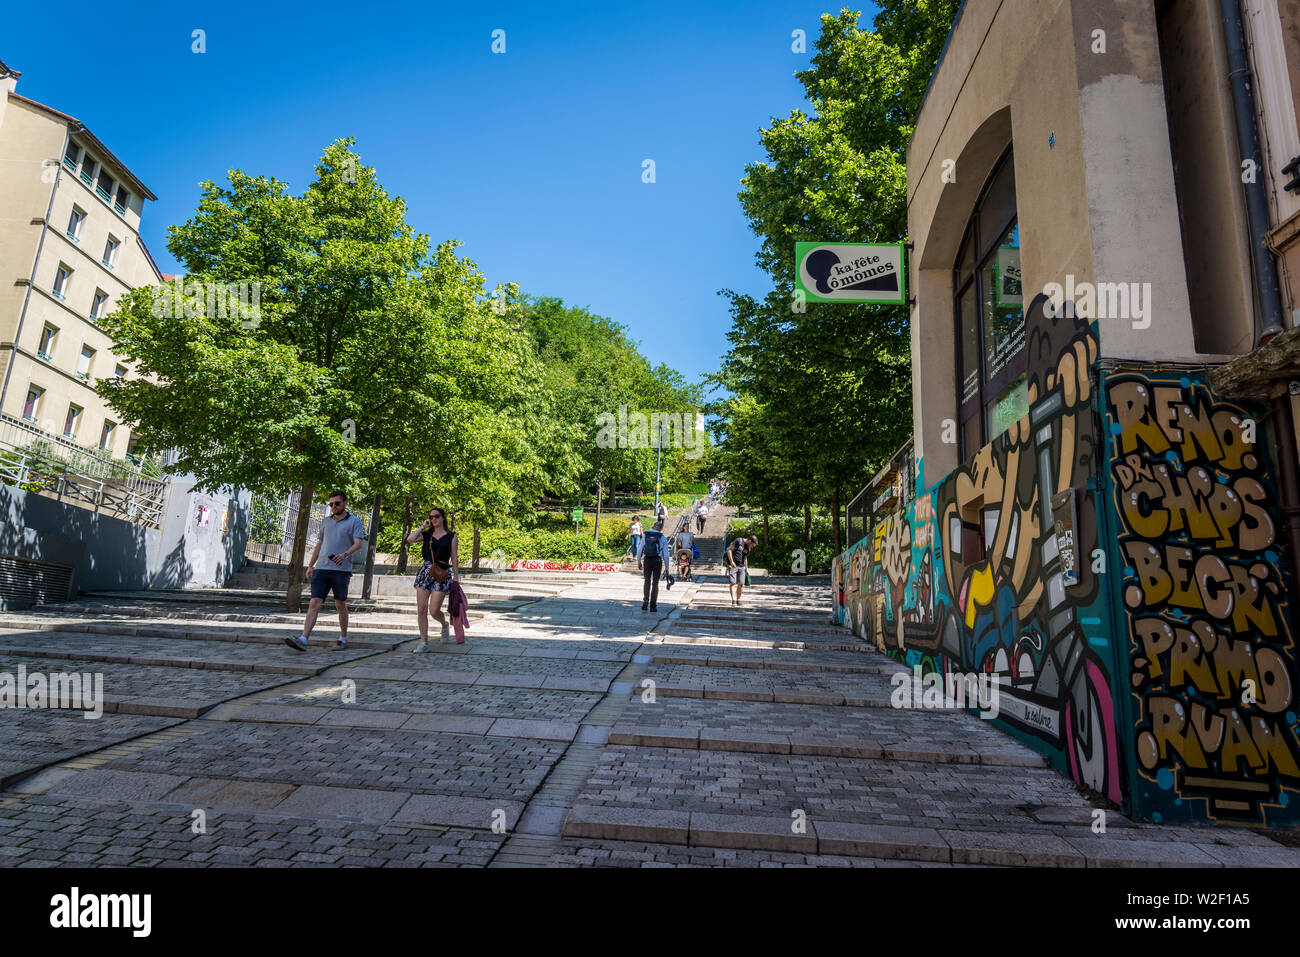 Rue Burdeau in La Croix-Rousse district, formerly silk manufacturers neighbourhood during 19th century, now a fashionable bohemian district, Lyon, Fra Stock Photo